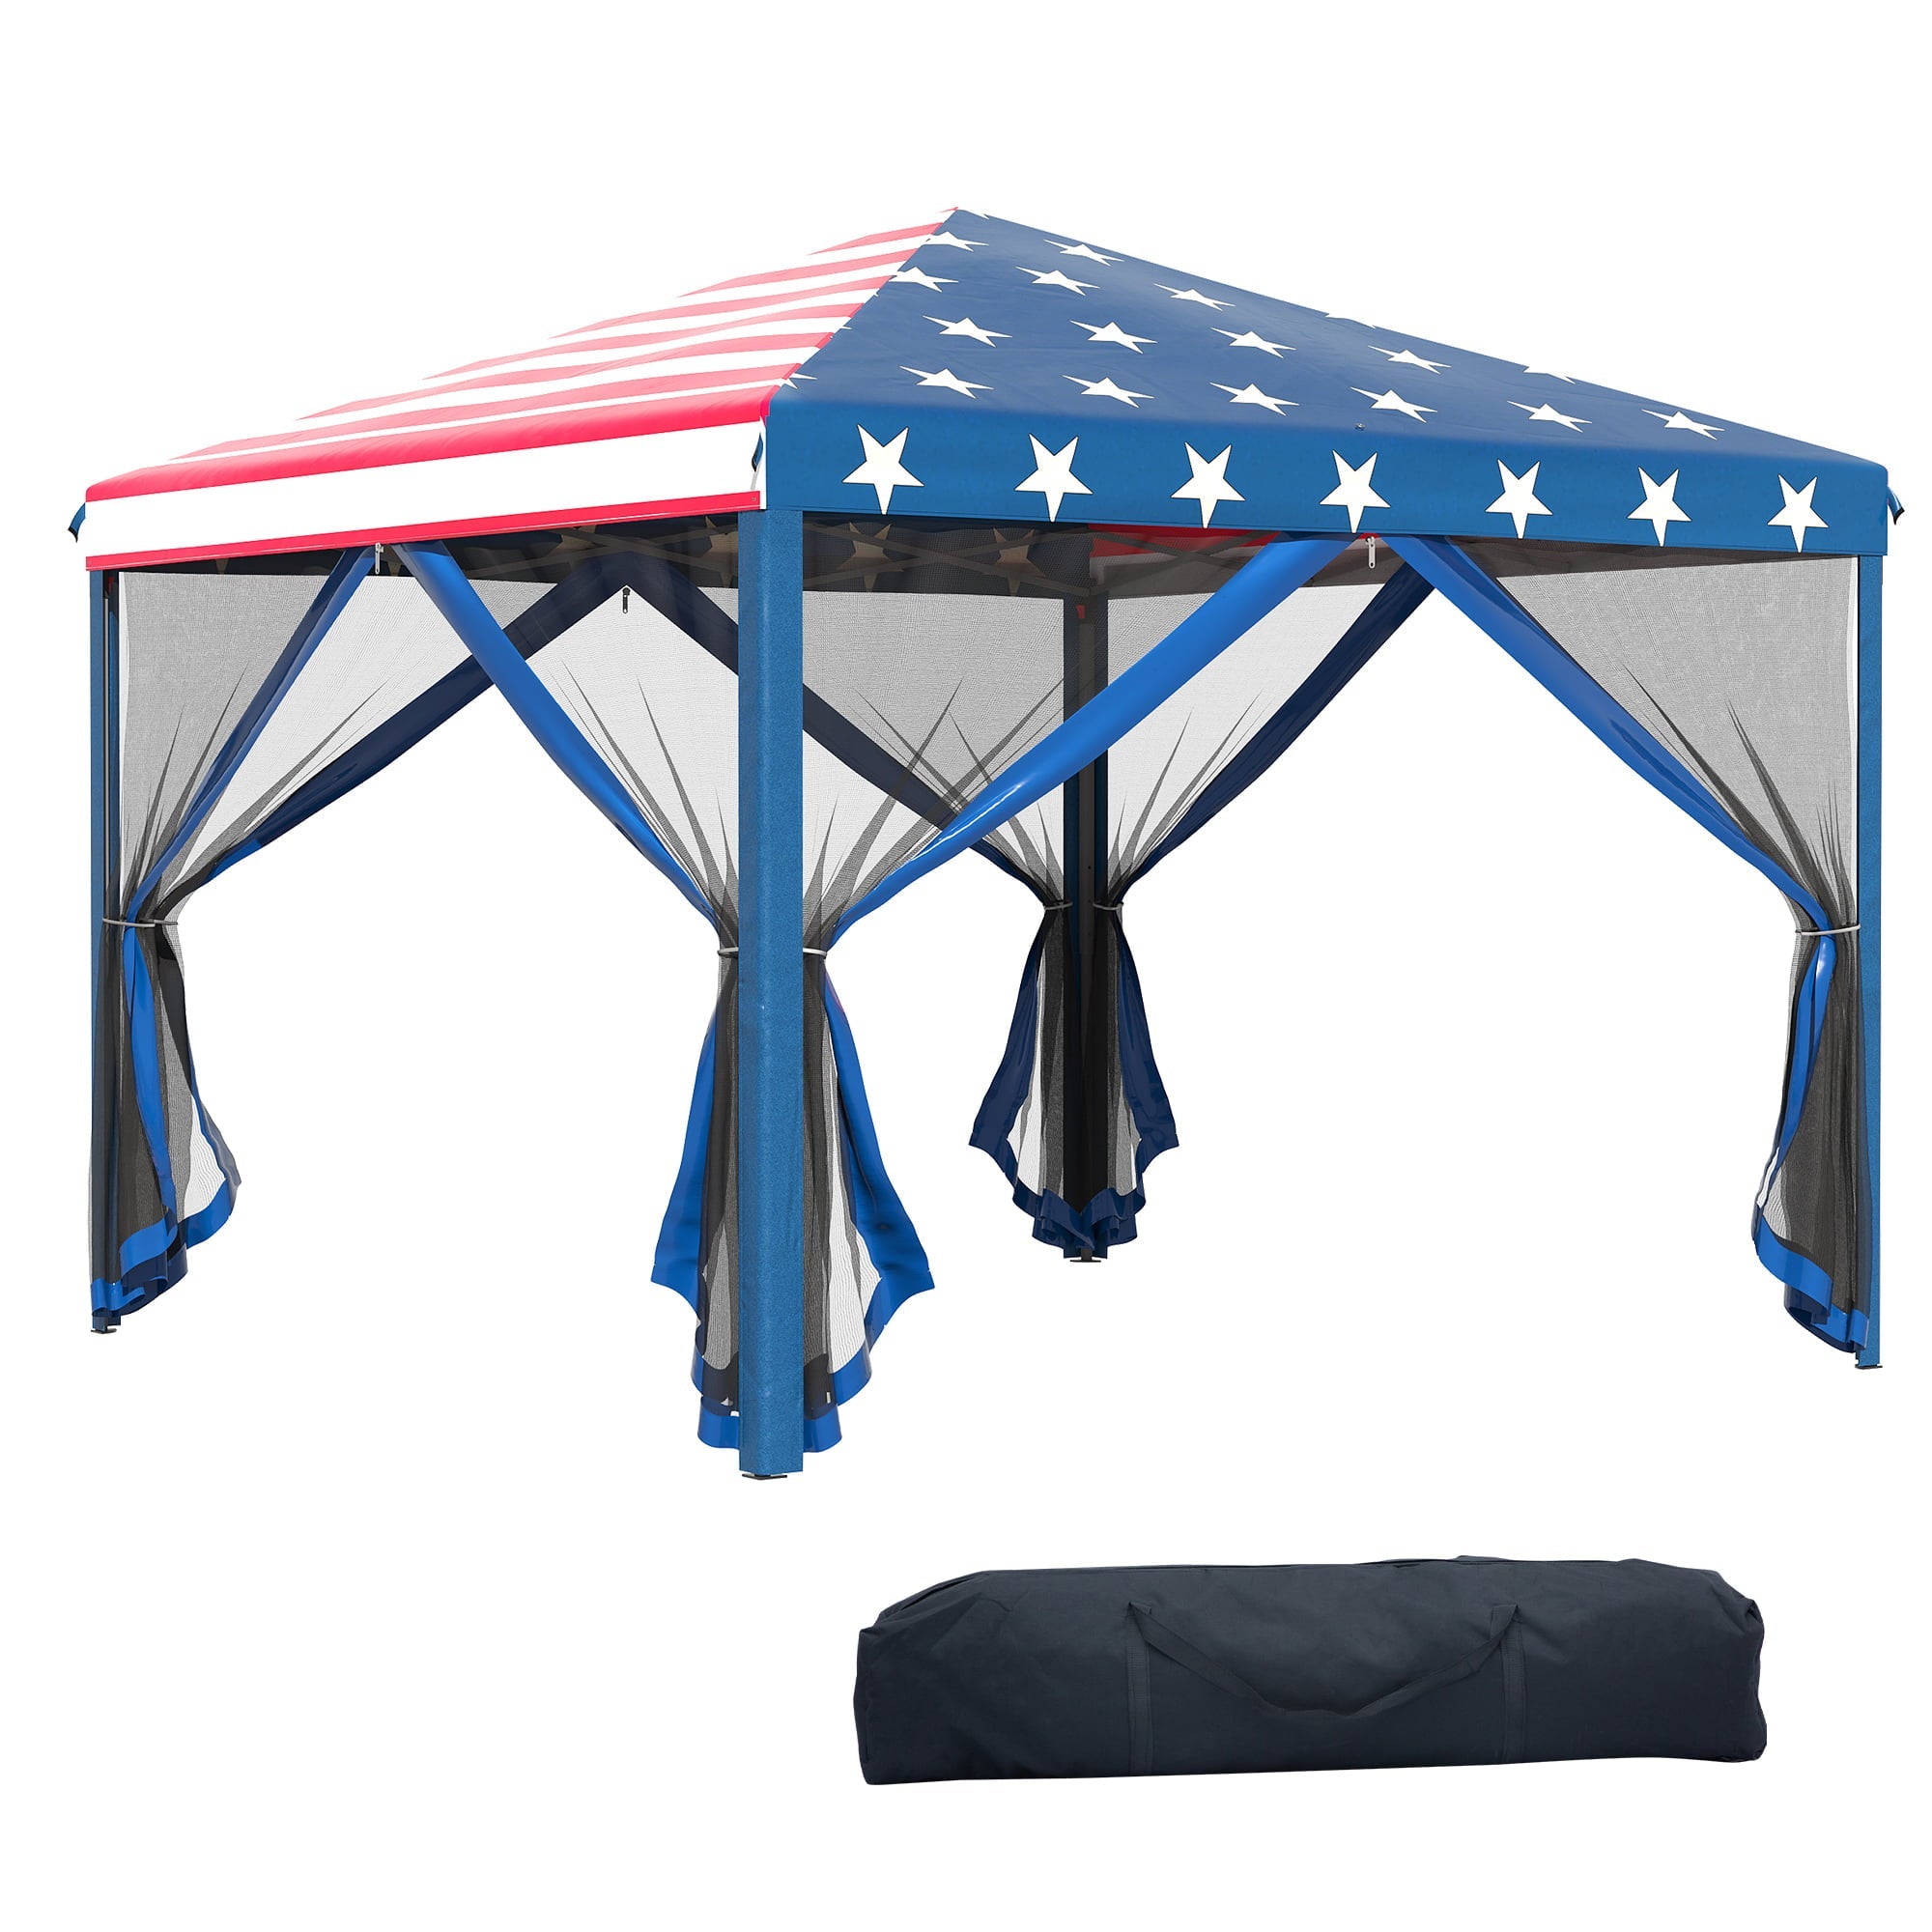 Outsunny 10' x 10' Pop-Up Canopy Shelter Party Tent with Mesh Walls - American Flag